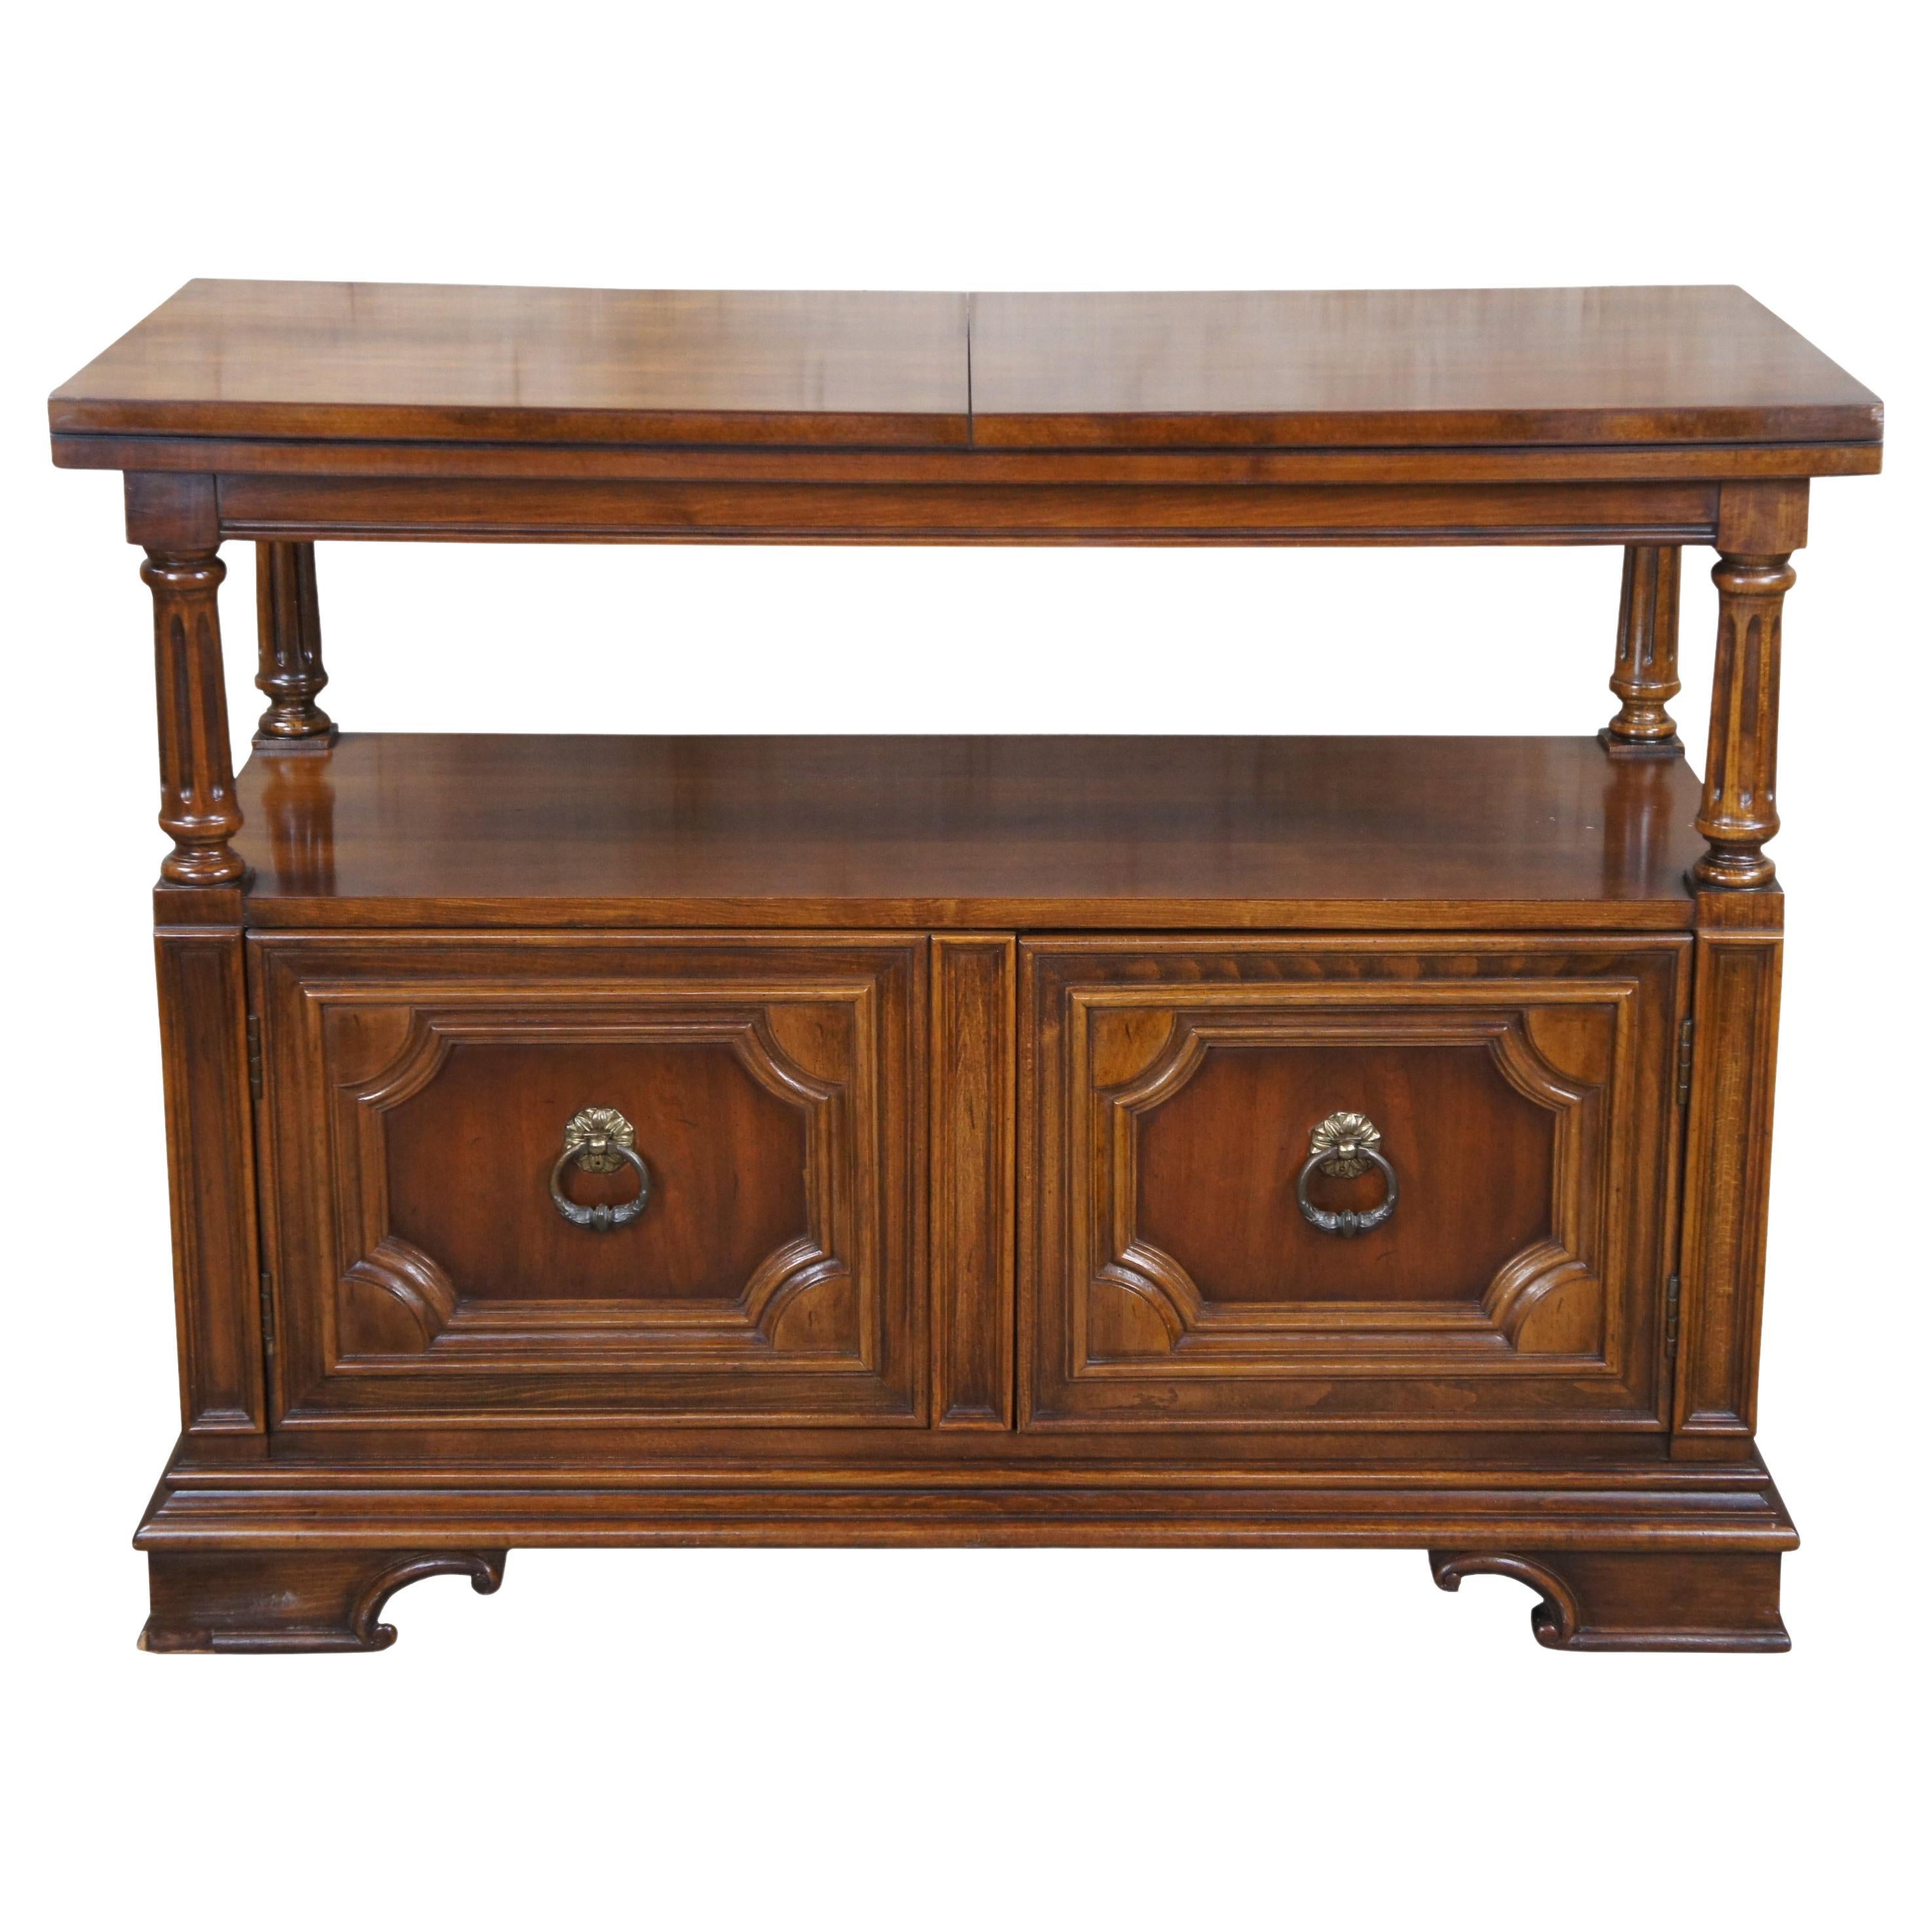 Thomasville Italian Provincial Traditional Flip Top Cherry Buffet Server Dry Bar For Sale